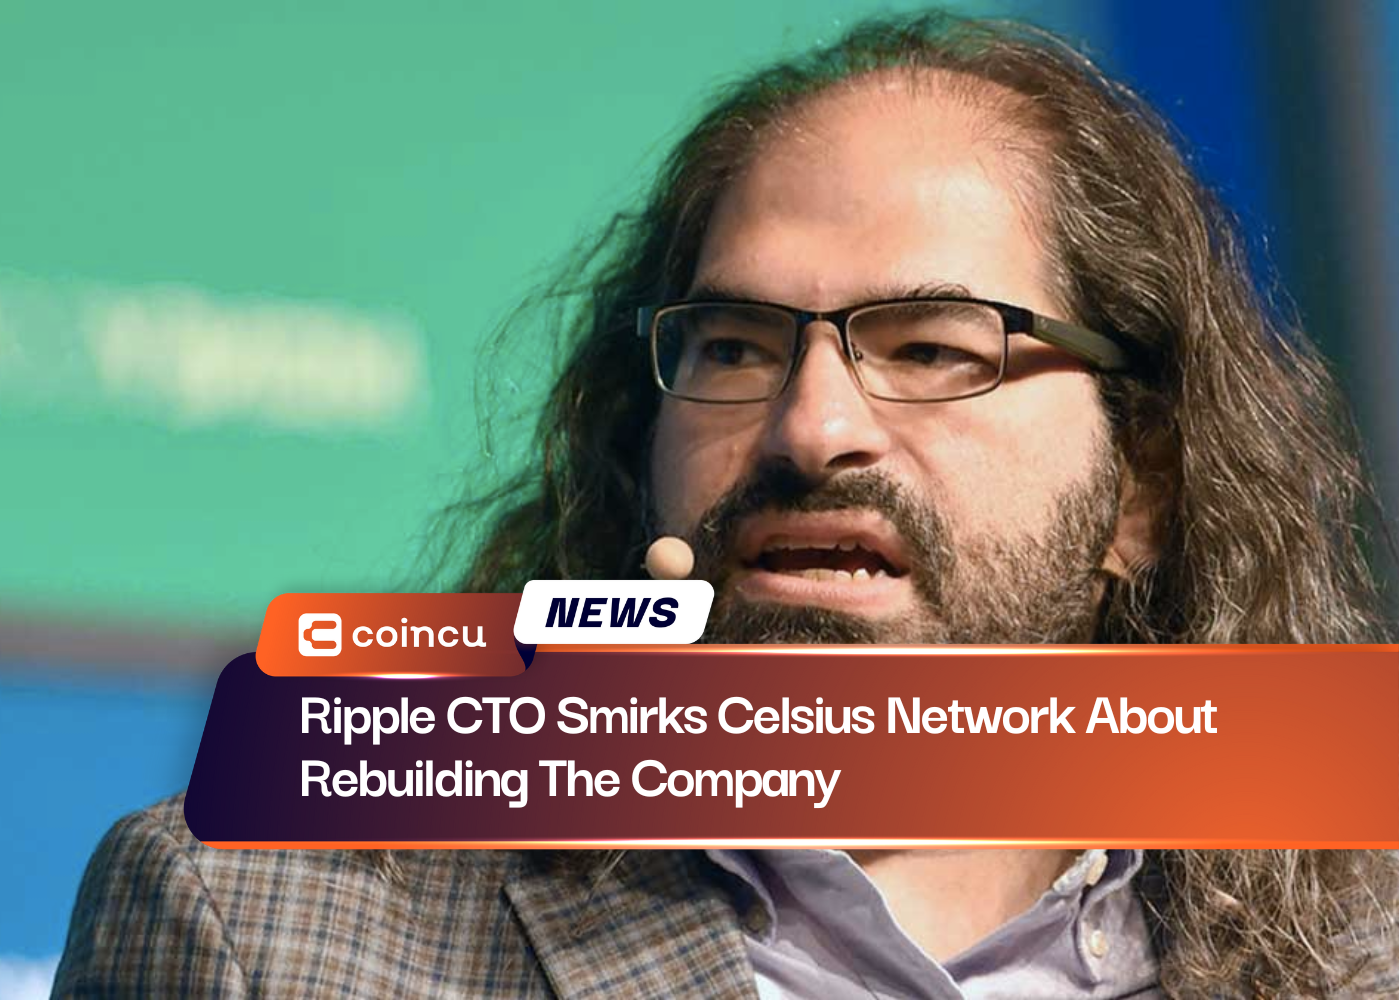 Ripple CTO Smirks Celsius Network About Rebuilding The Company